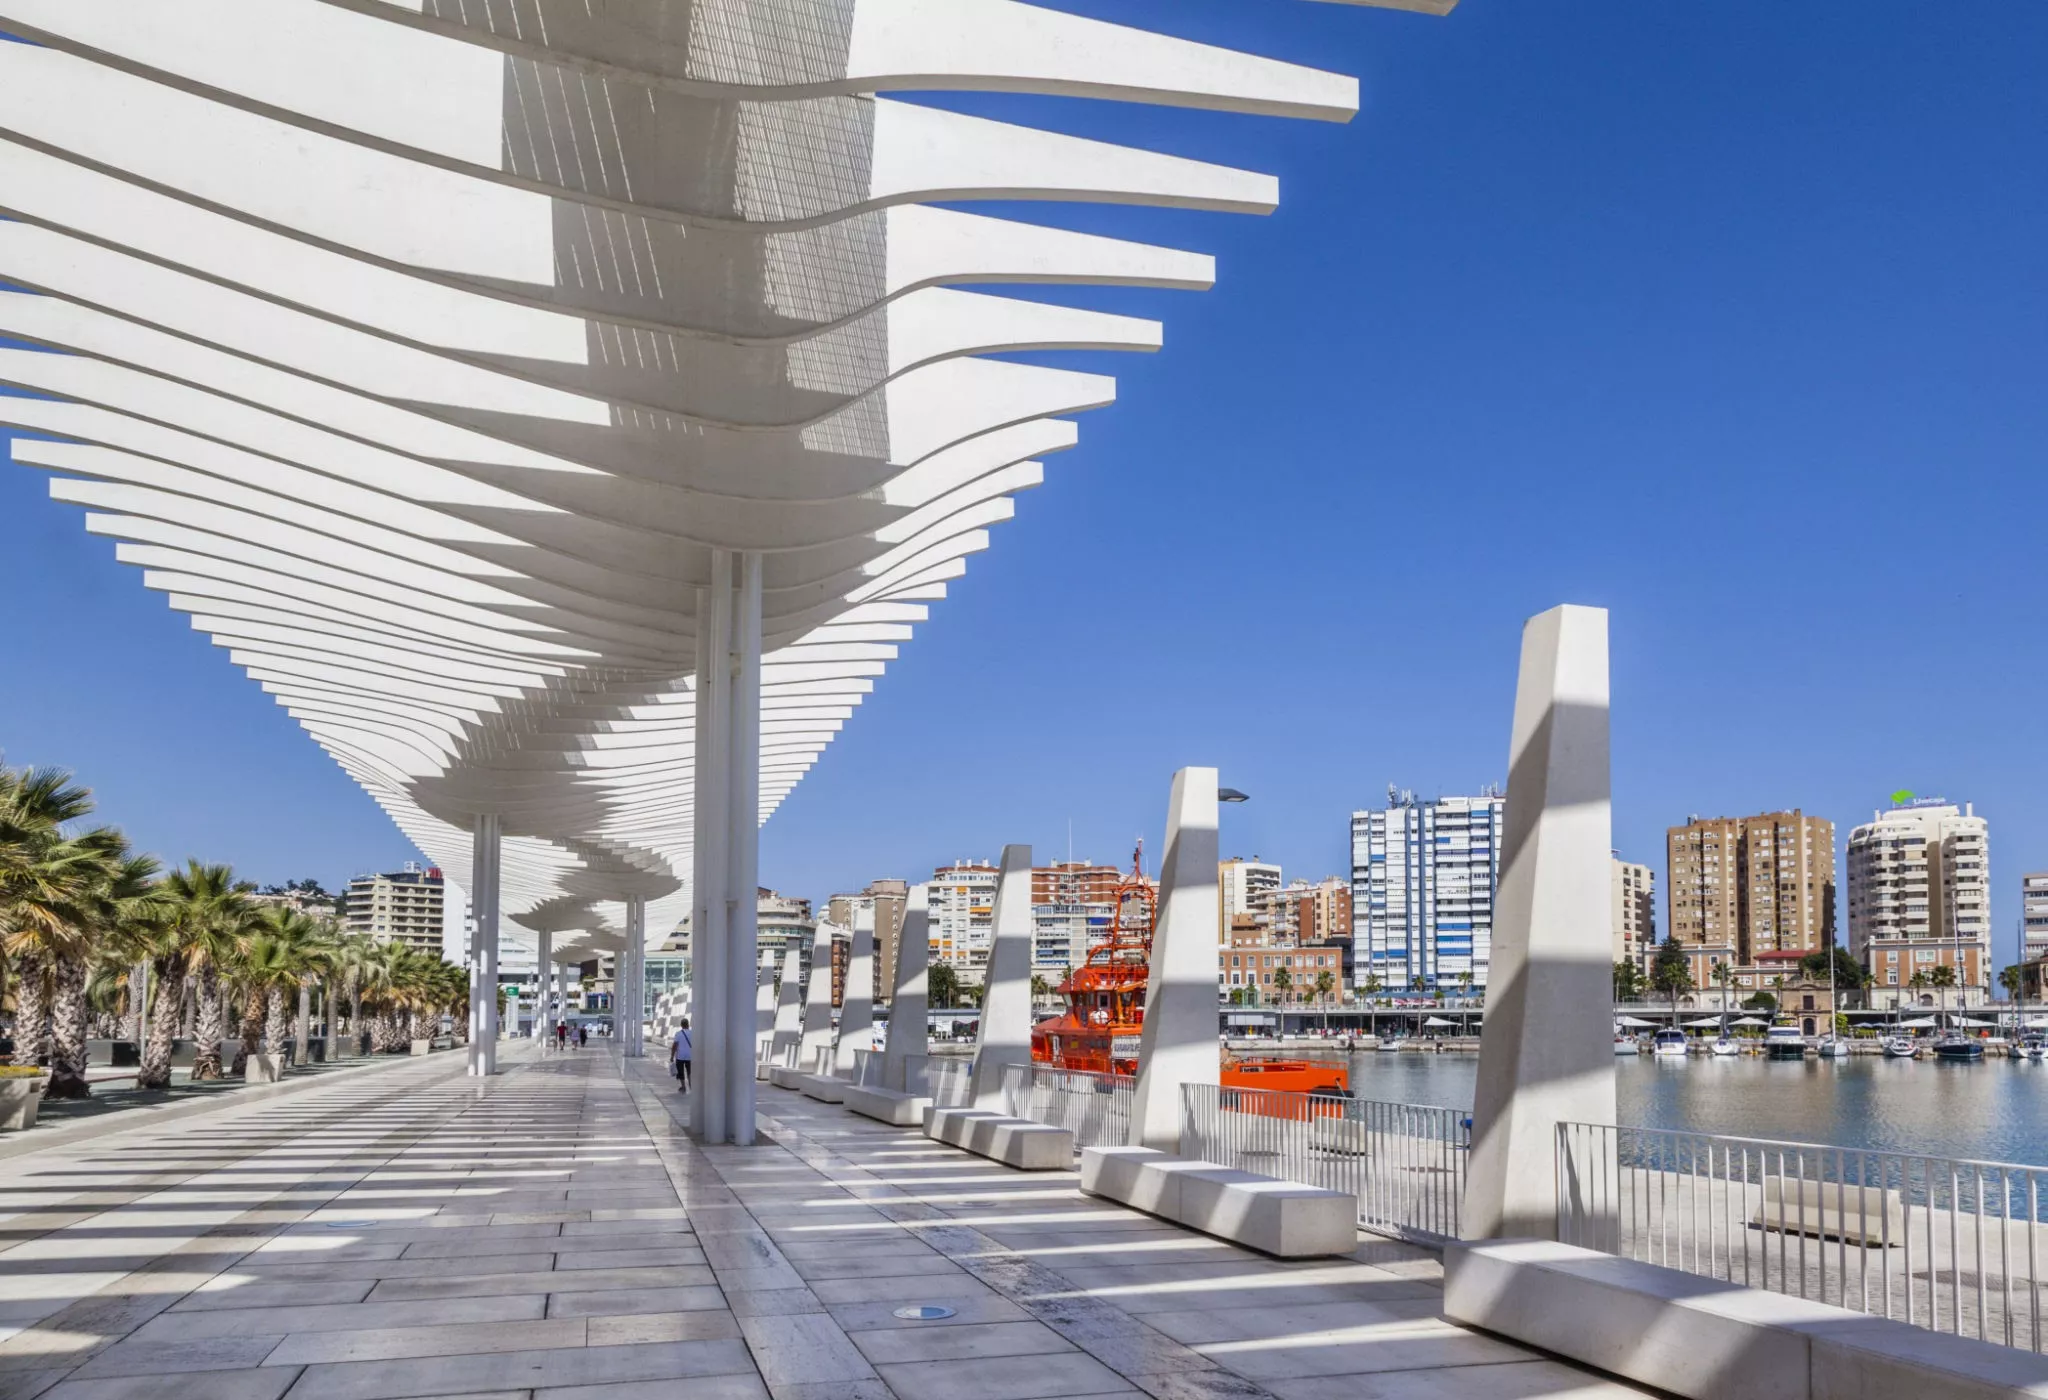 Palm Tree Of Surprises in Spain, Europe | Architecture - Rated 3.6